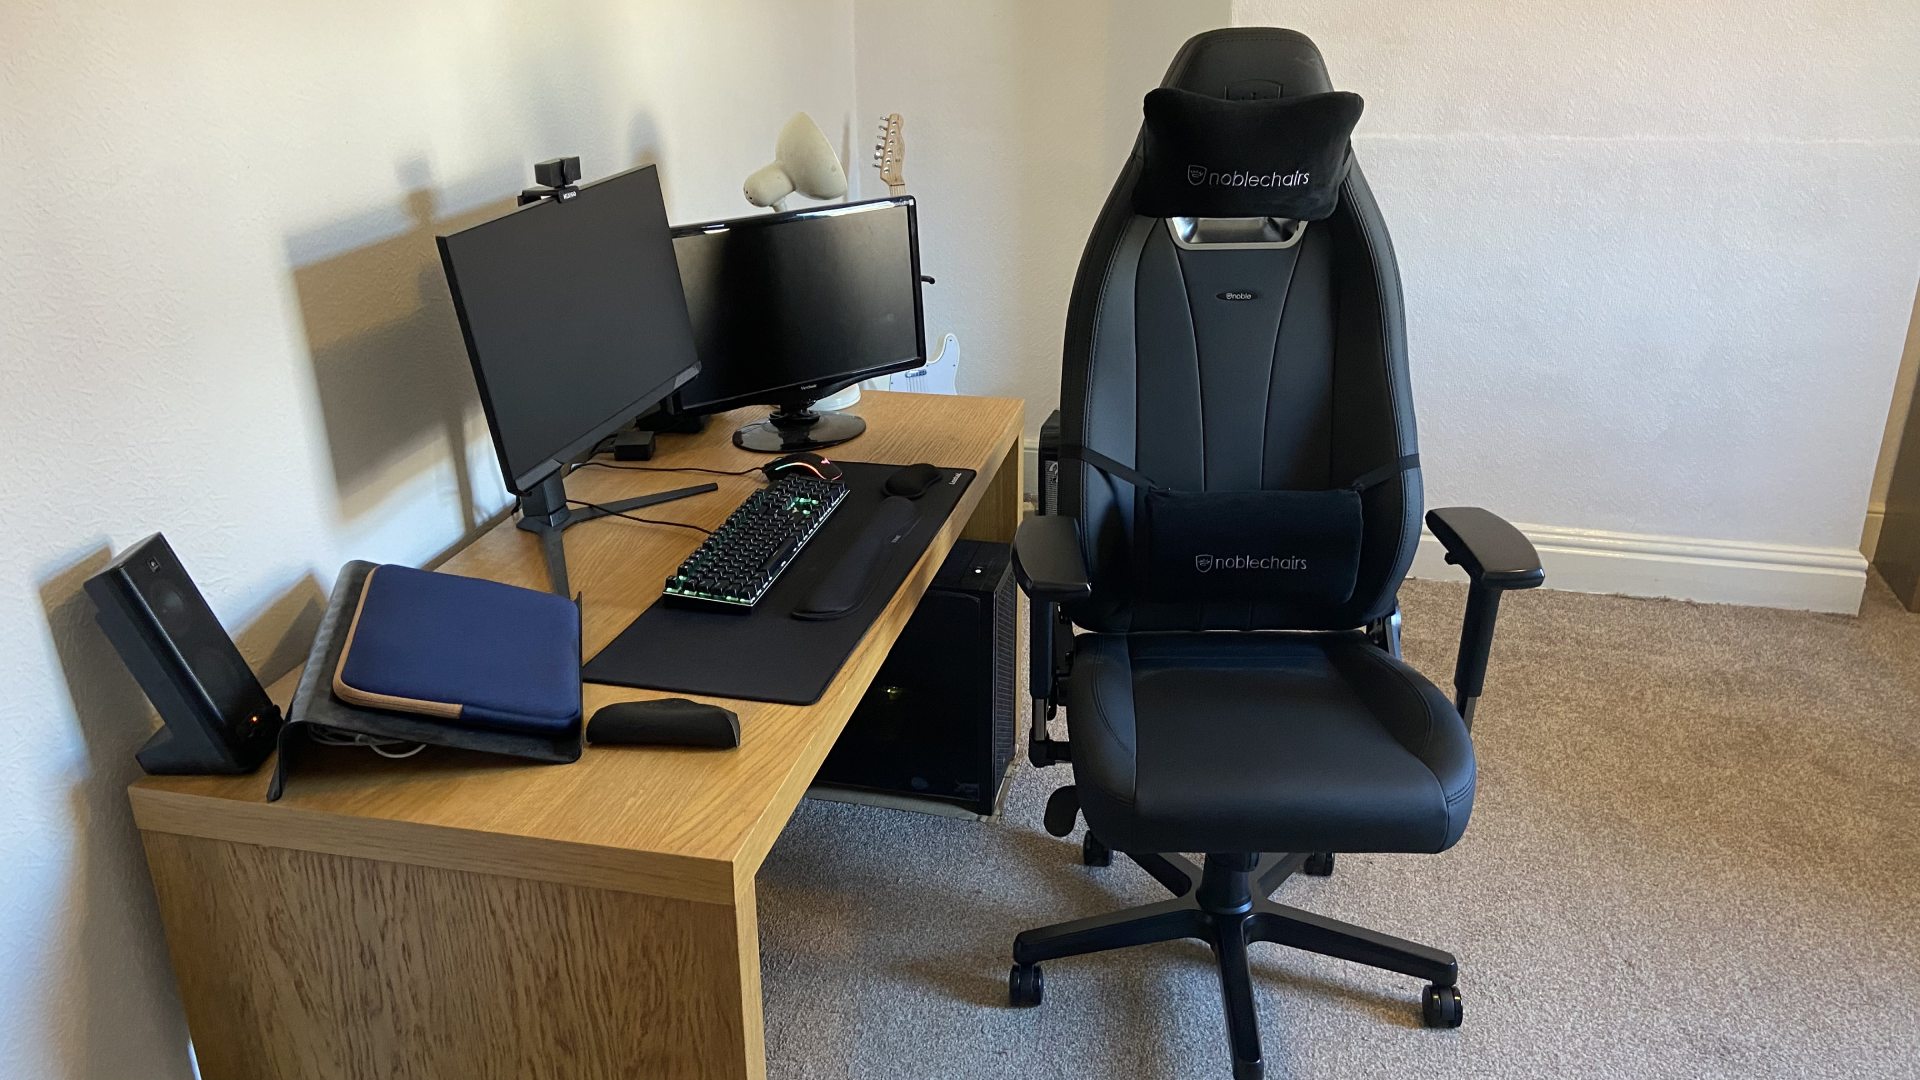 Best gaming chair: Noblechairs Legend in typical office room with desk